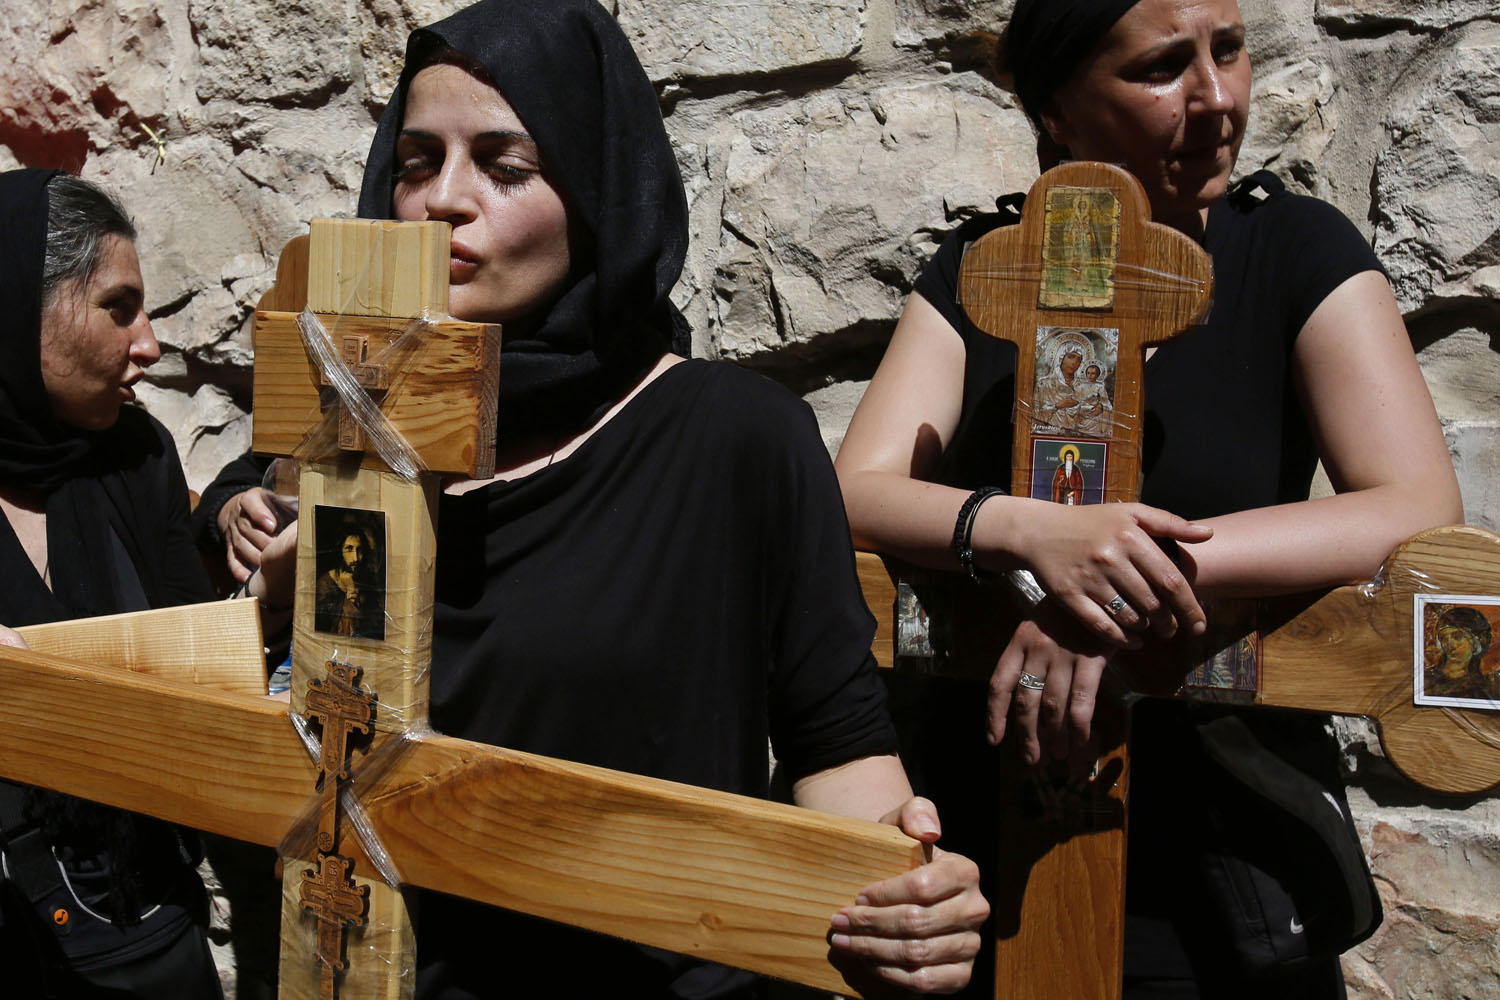 ISRAEL-PALESTINIAN-RELIGION-CHRISTIANITY-EASTER